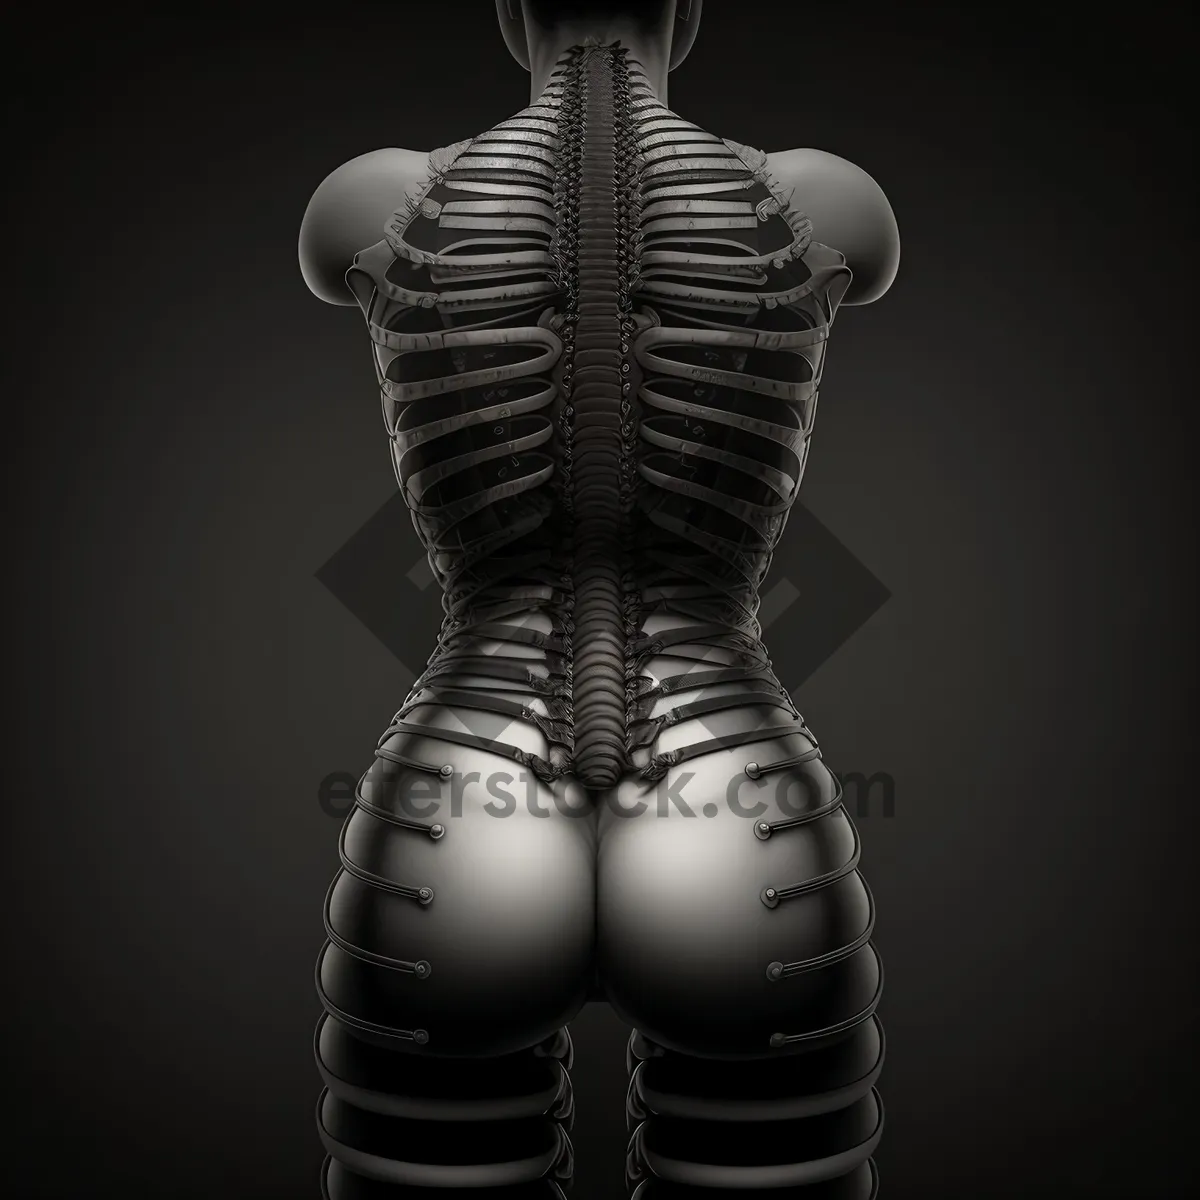 Picture of Anatomical Skeleton X-Ray: Detailed 3D Visualization of Human Bones